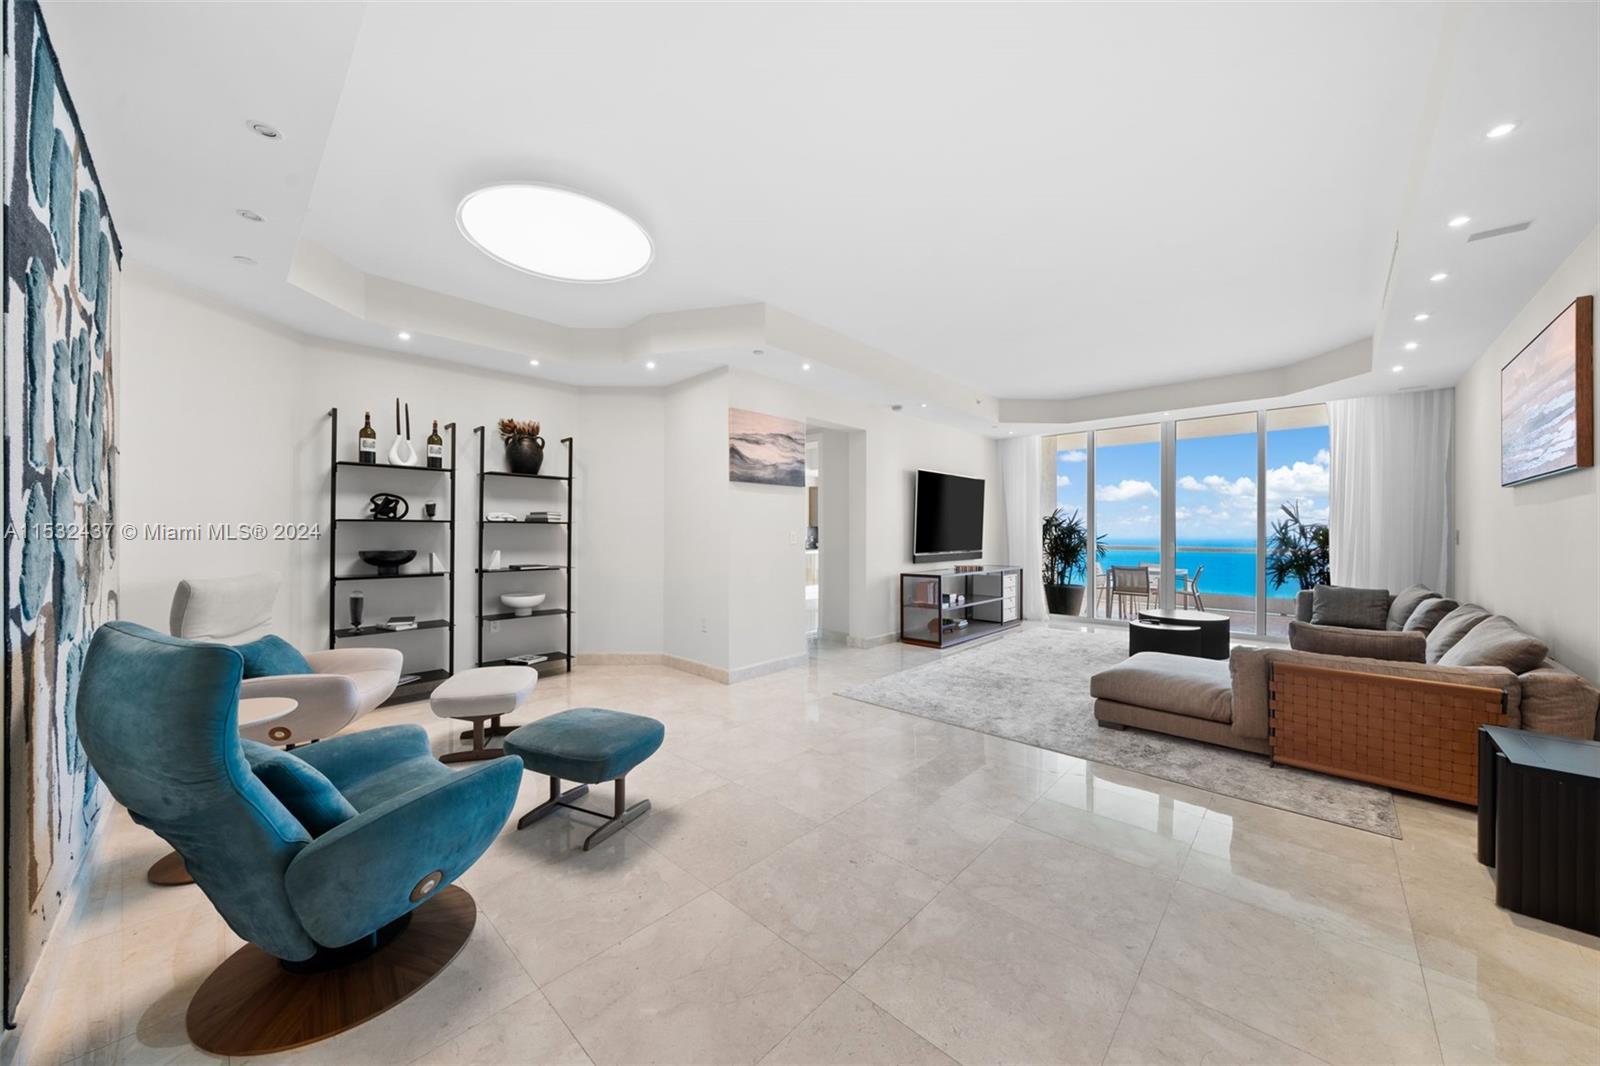 Photo of 16047 Collins Ave #2202 in Sunny Isles Beach, FL